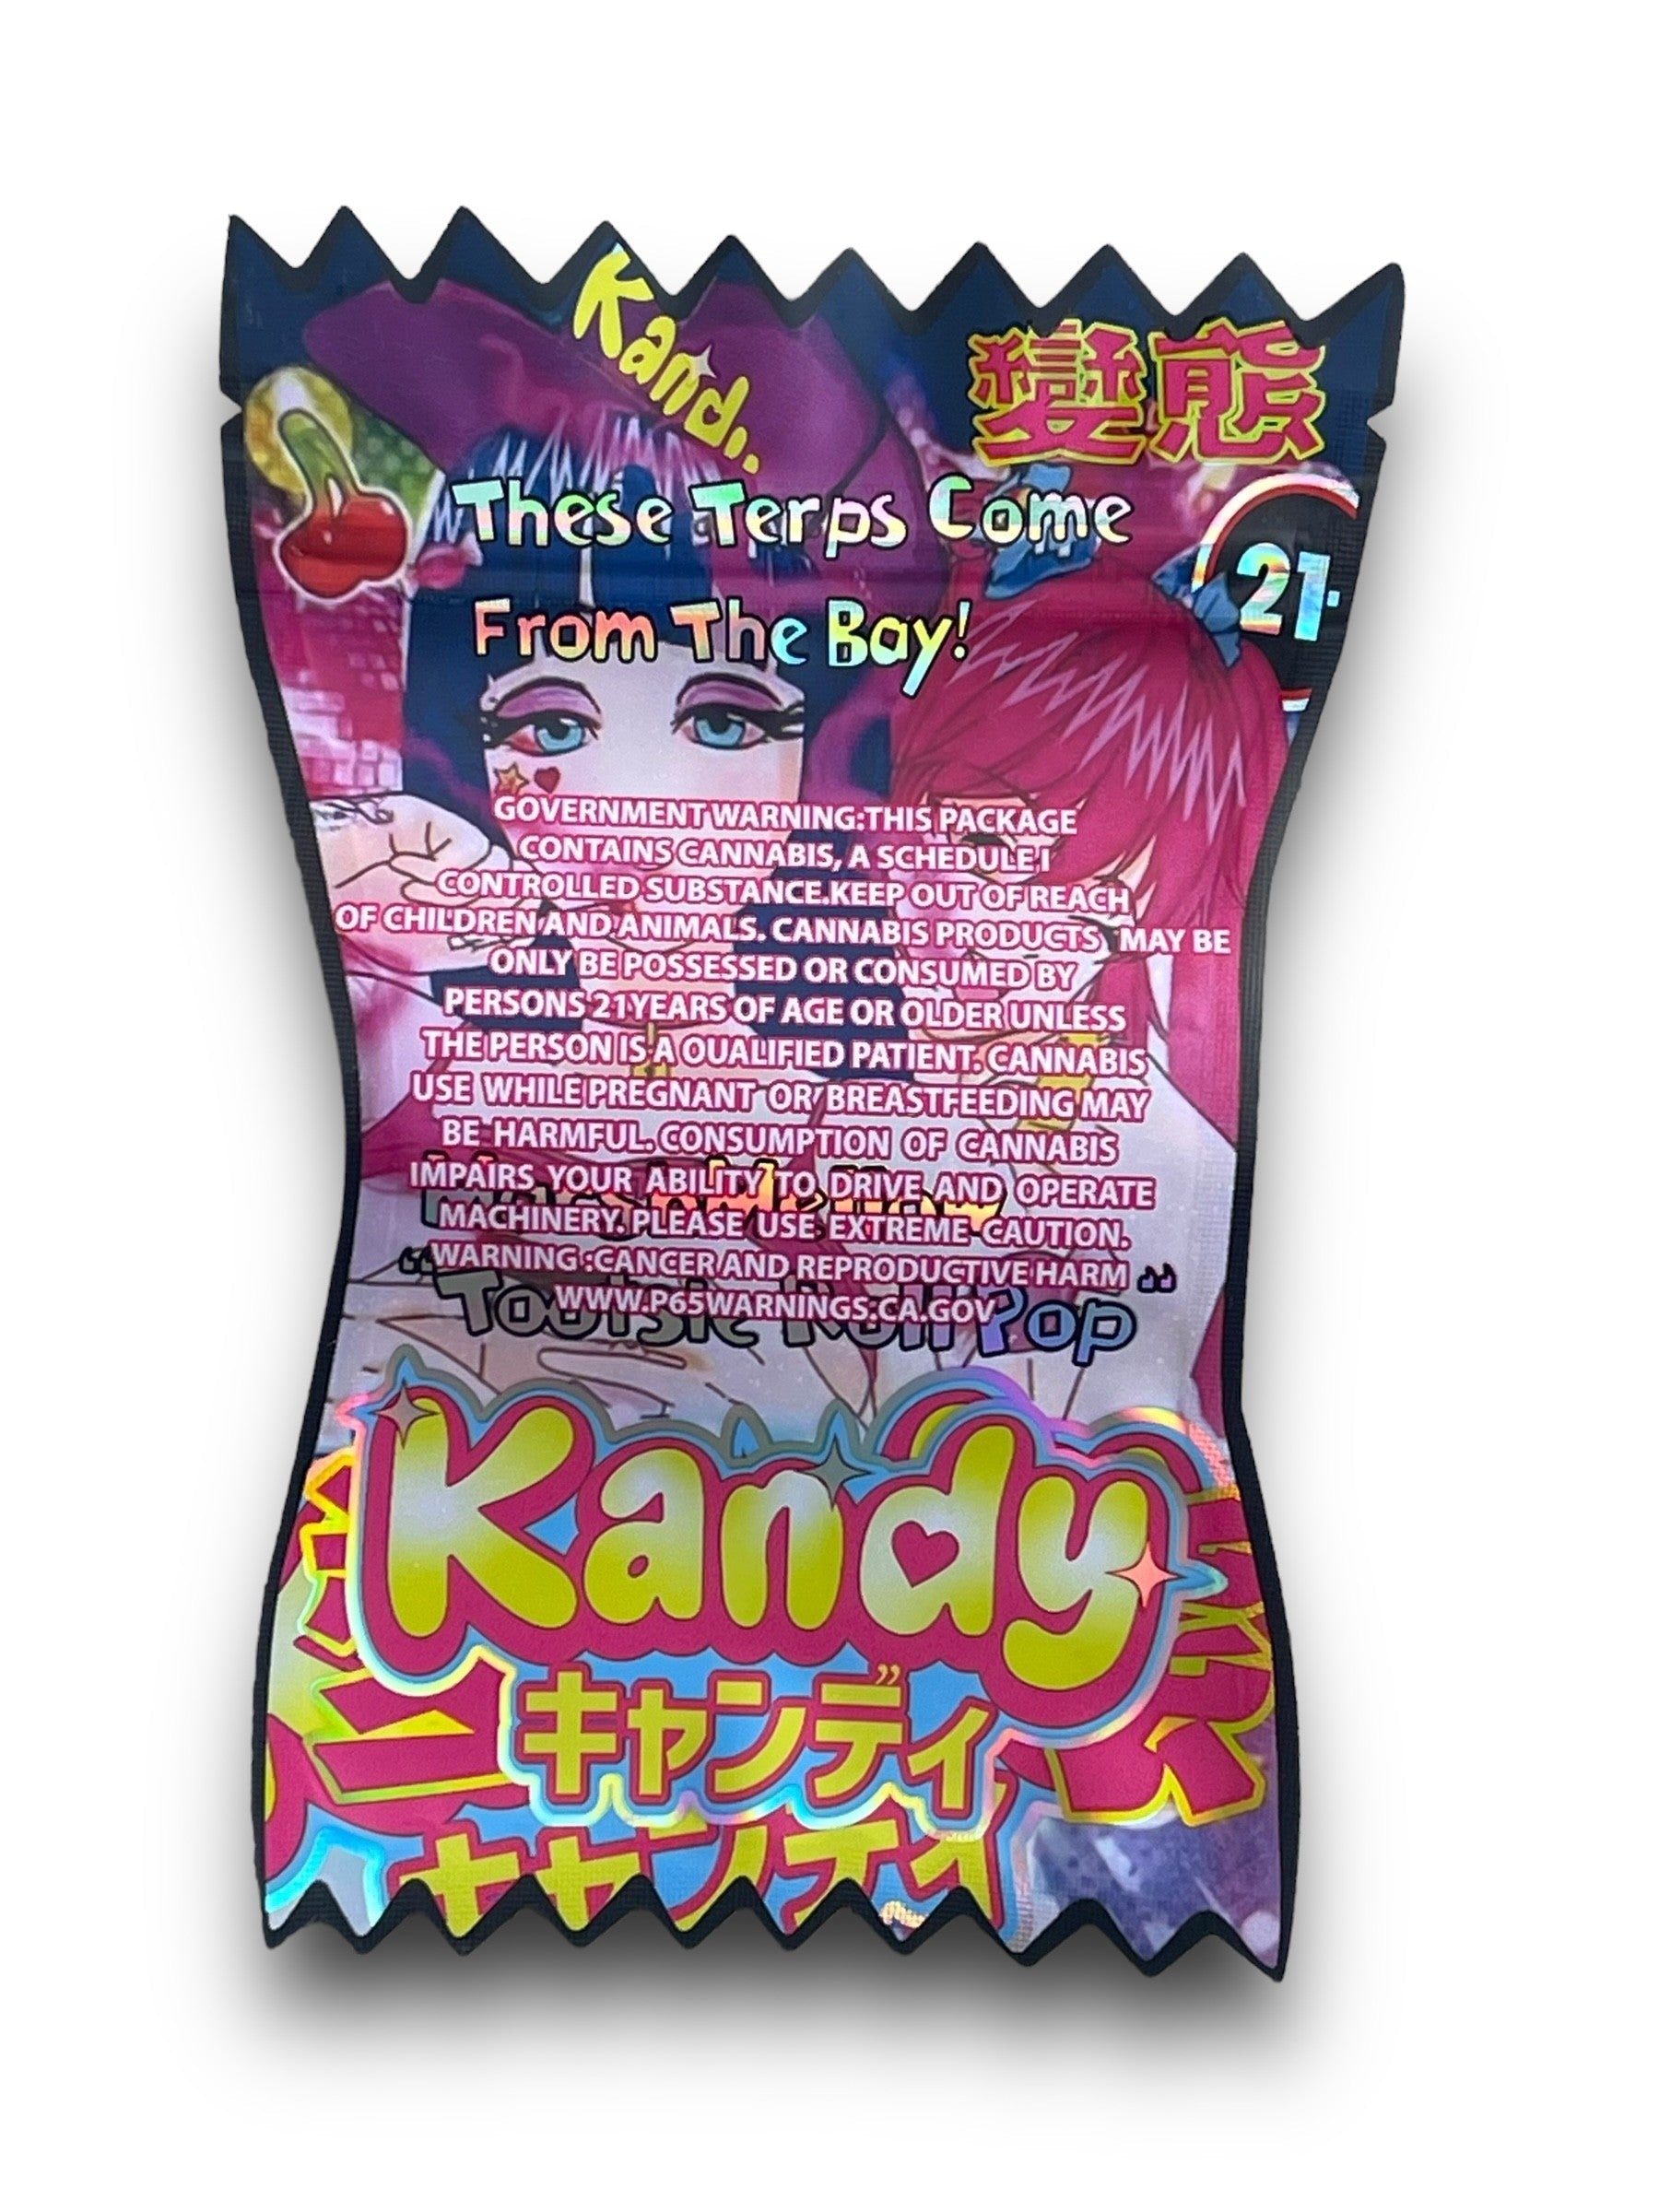 Kandy Marshmellow Tootsie Roll Pop 3.5G Mylar Bags Holographic cut out